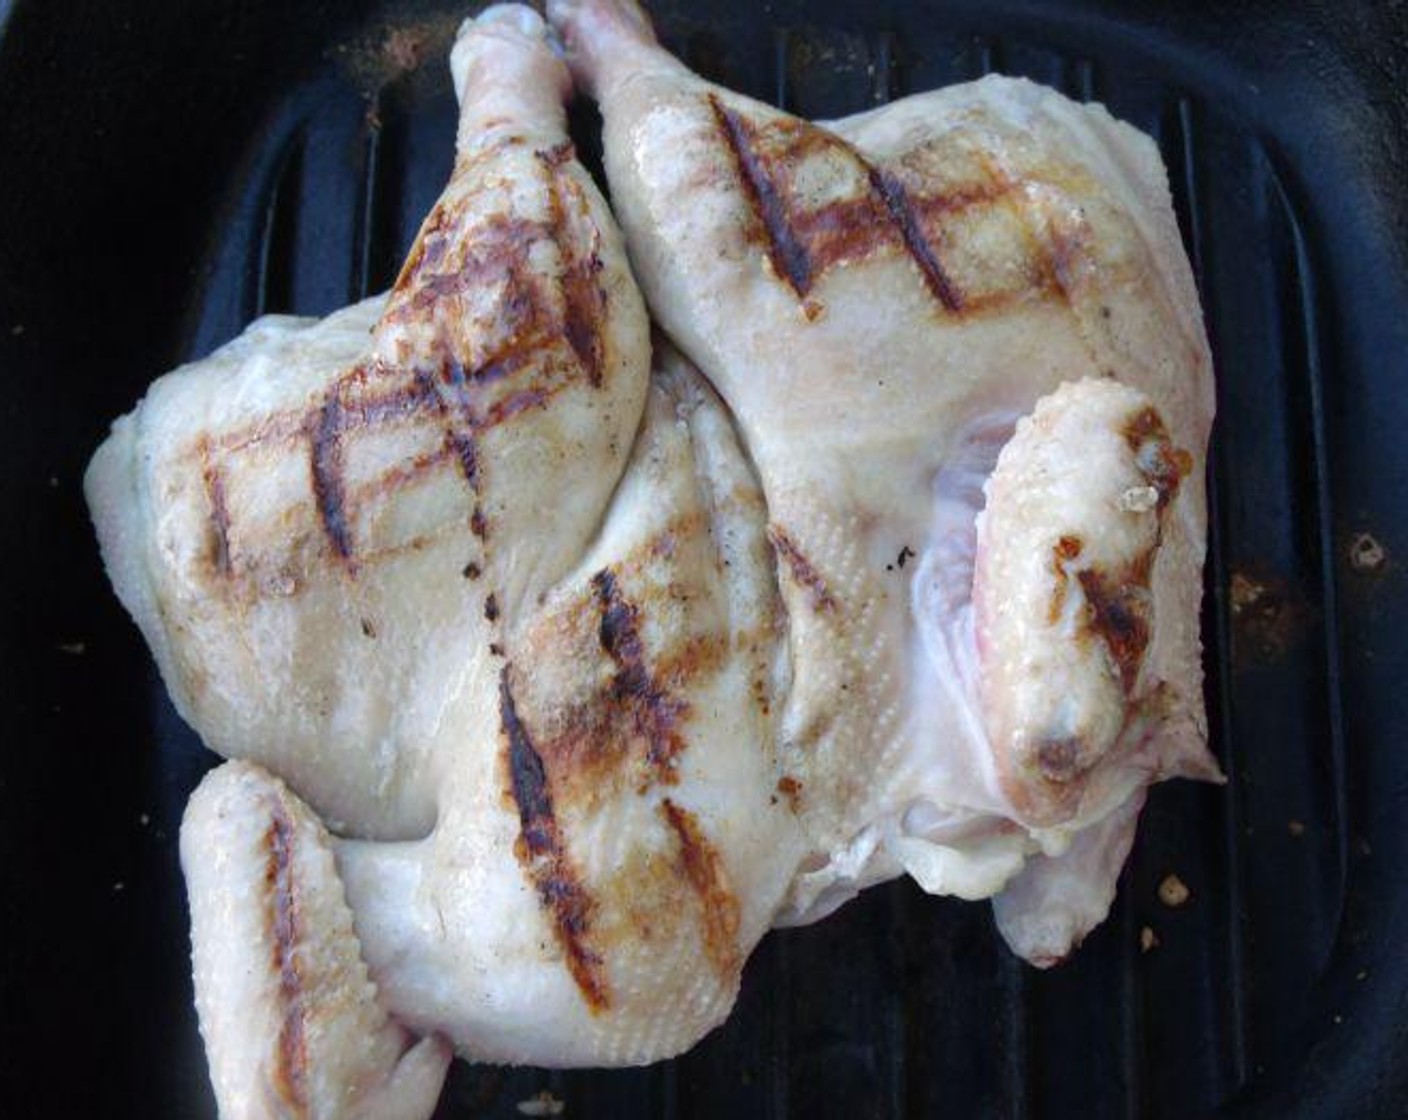 step 4 Grill poultry on both sides, then finish by roasting in a 375 degrees F (190 degrees C) oven until about 3/4 cooked. This will take about 20-25 minutes for a small hen and longer for a chicken, depending on size.